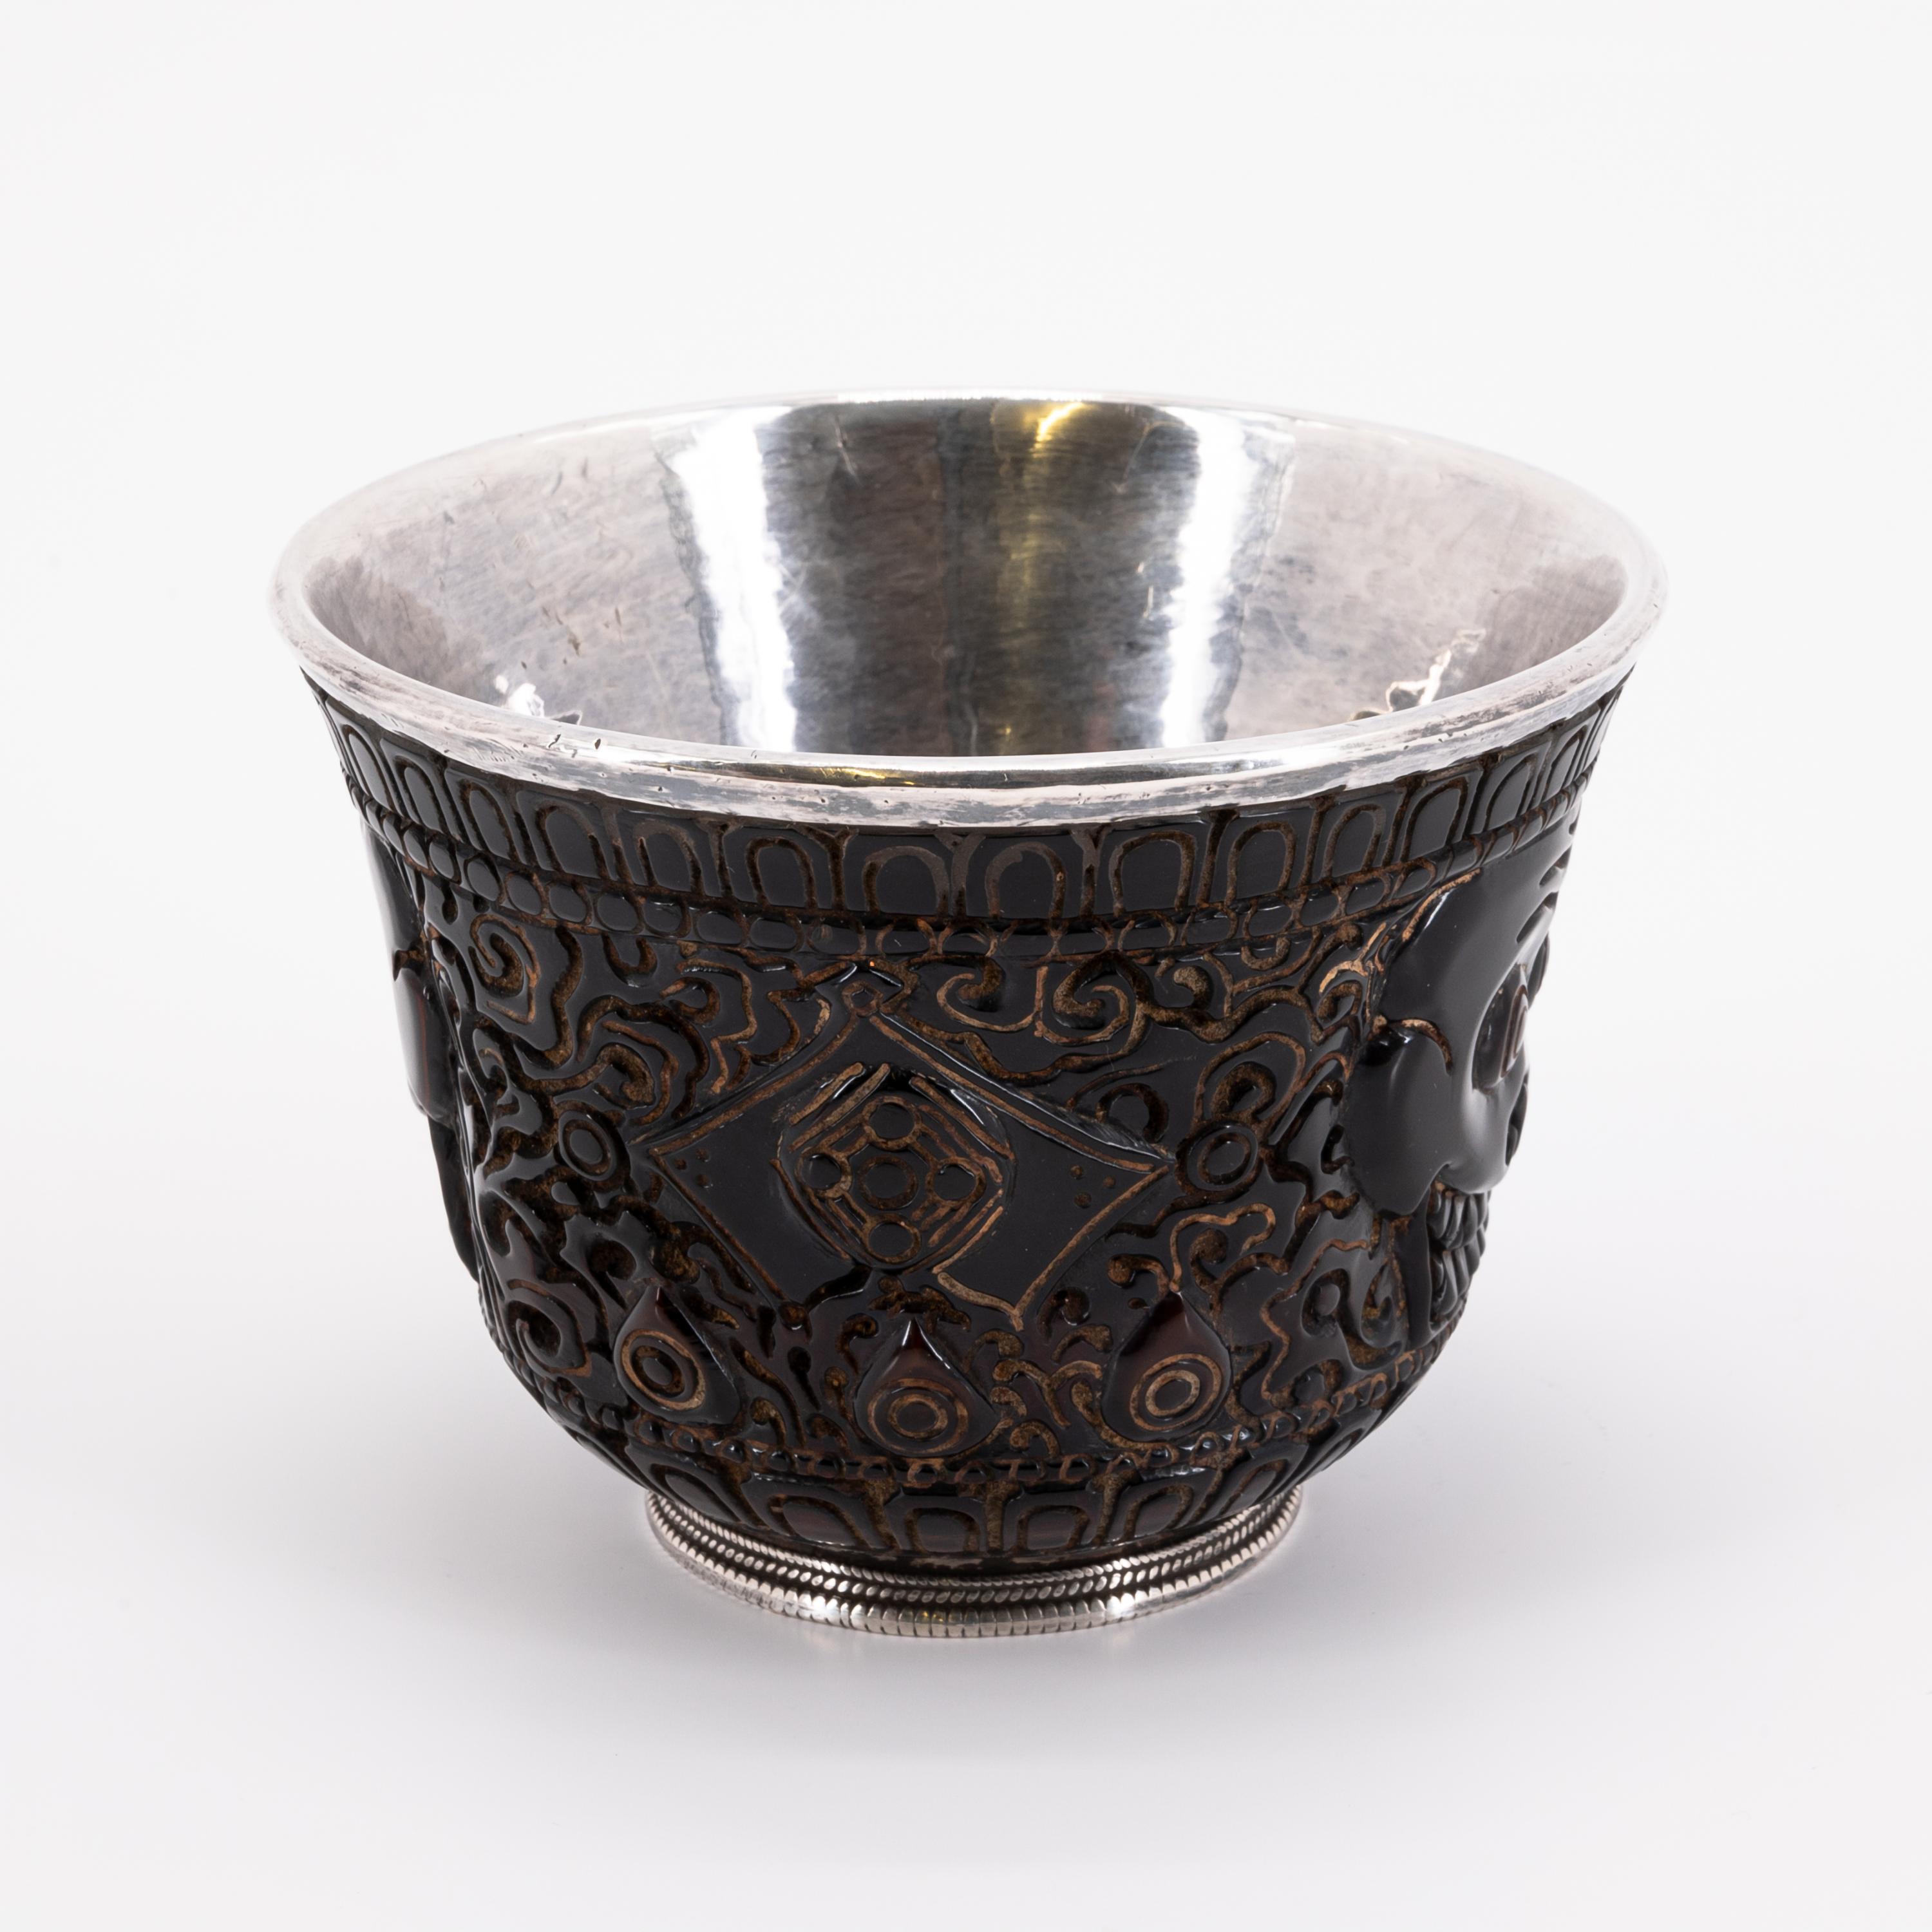 AMBER RITUAL VESSEL WITH FACES AND ORNAMENTAL DECORATION - Image 4 of 6